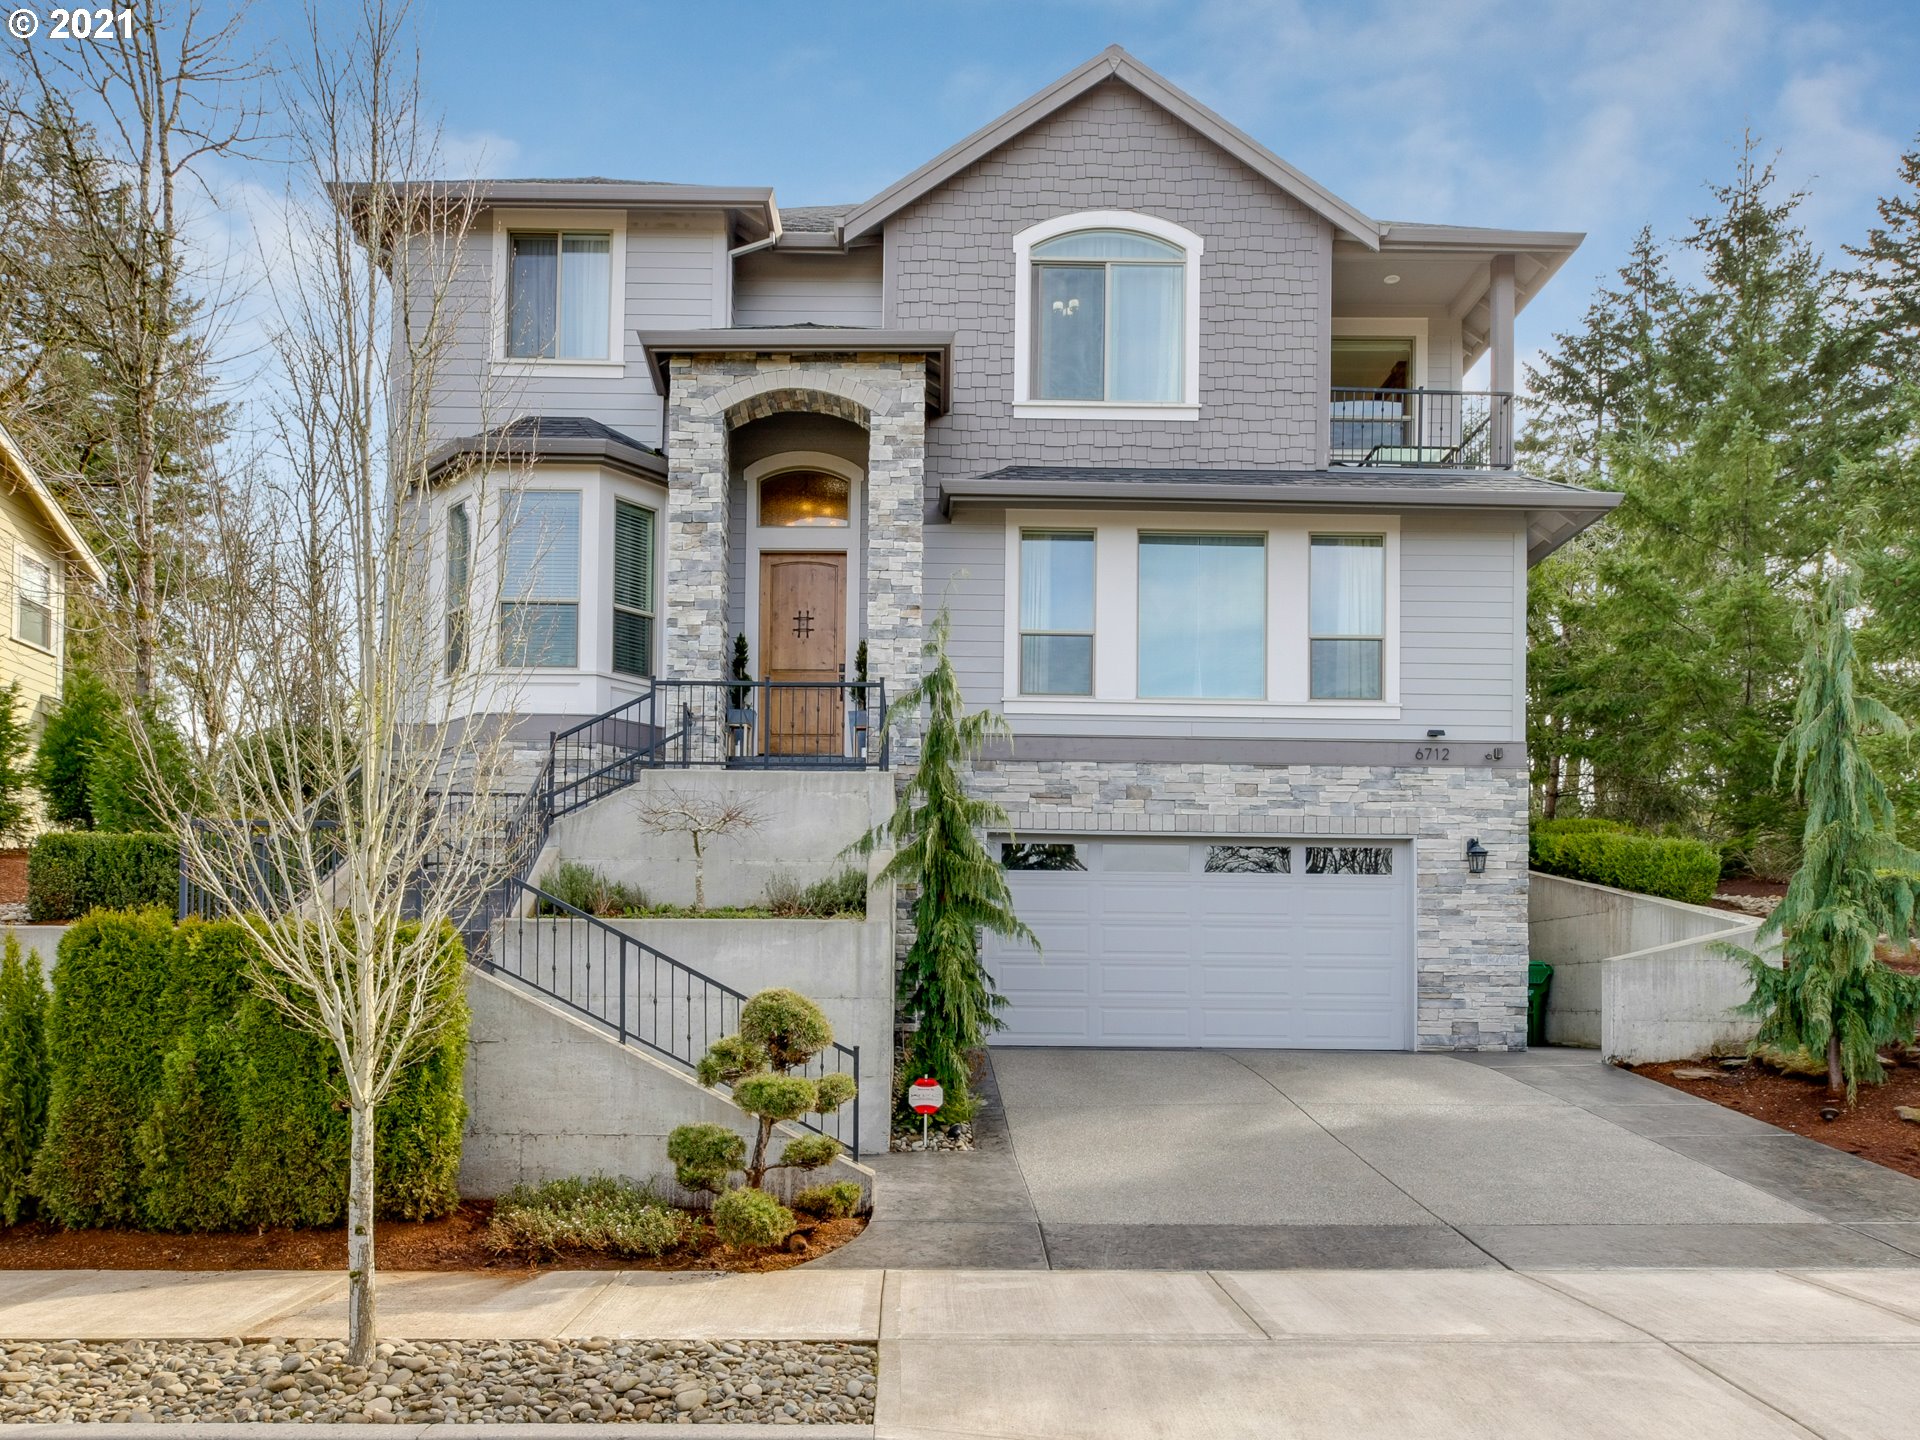 6712 SE 148TH AVE (1 of 32)